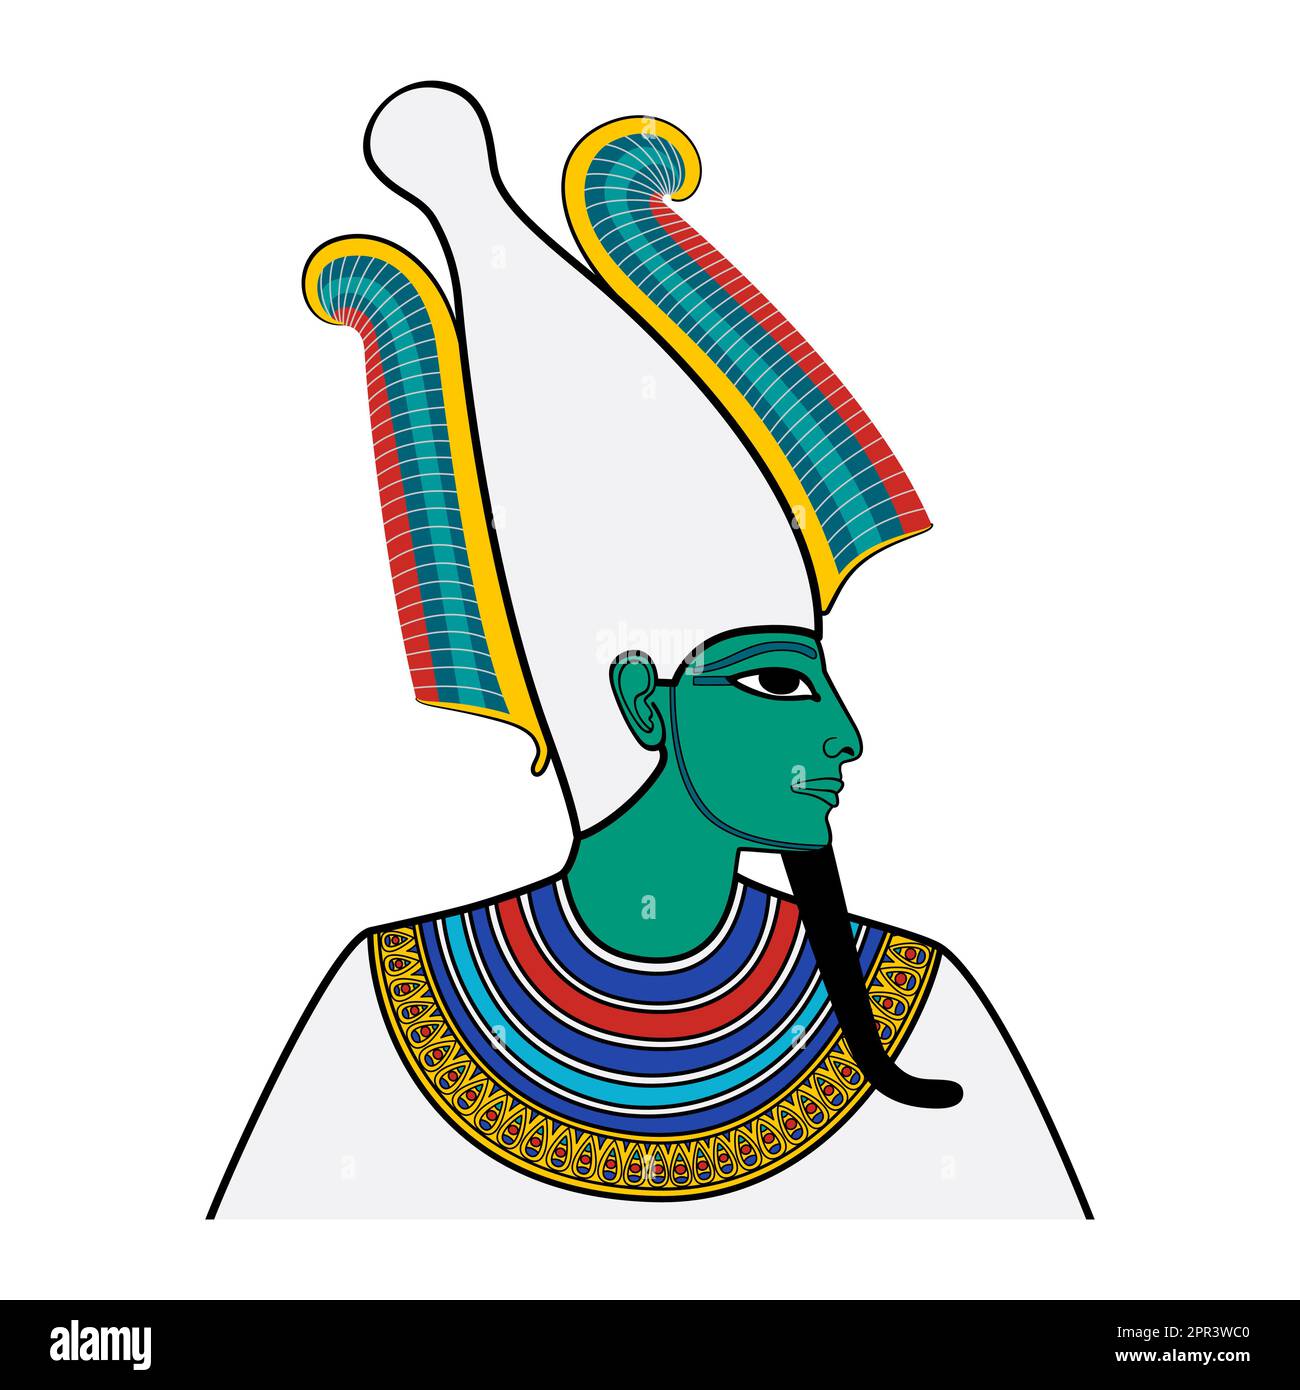 Osiris, god of afterlife, dead and resurrection in ancient Egypt religion Stock Vector